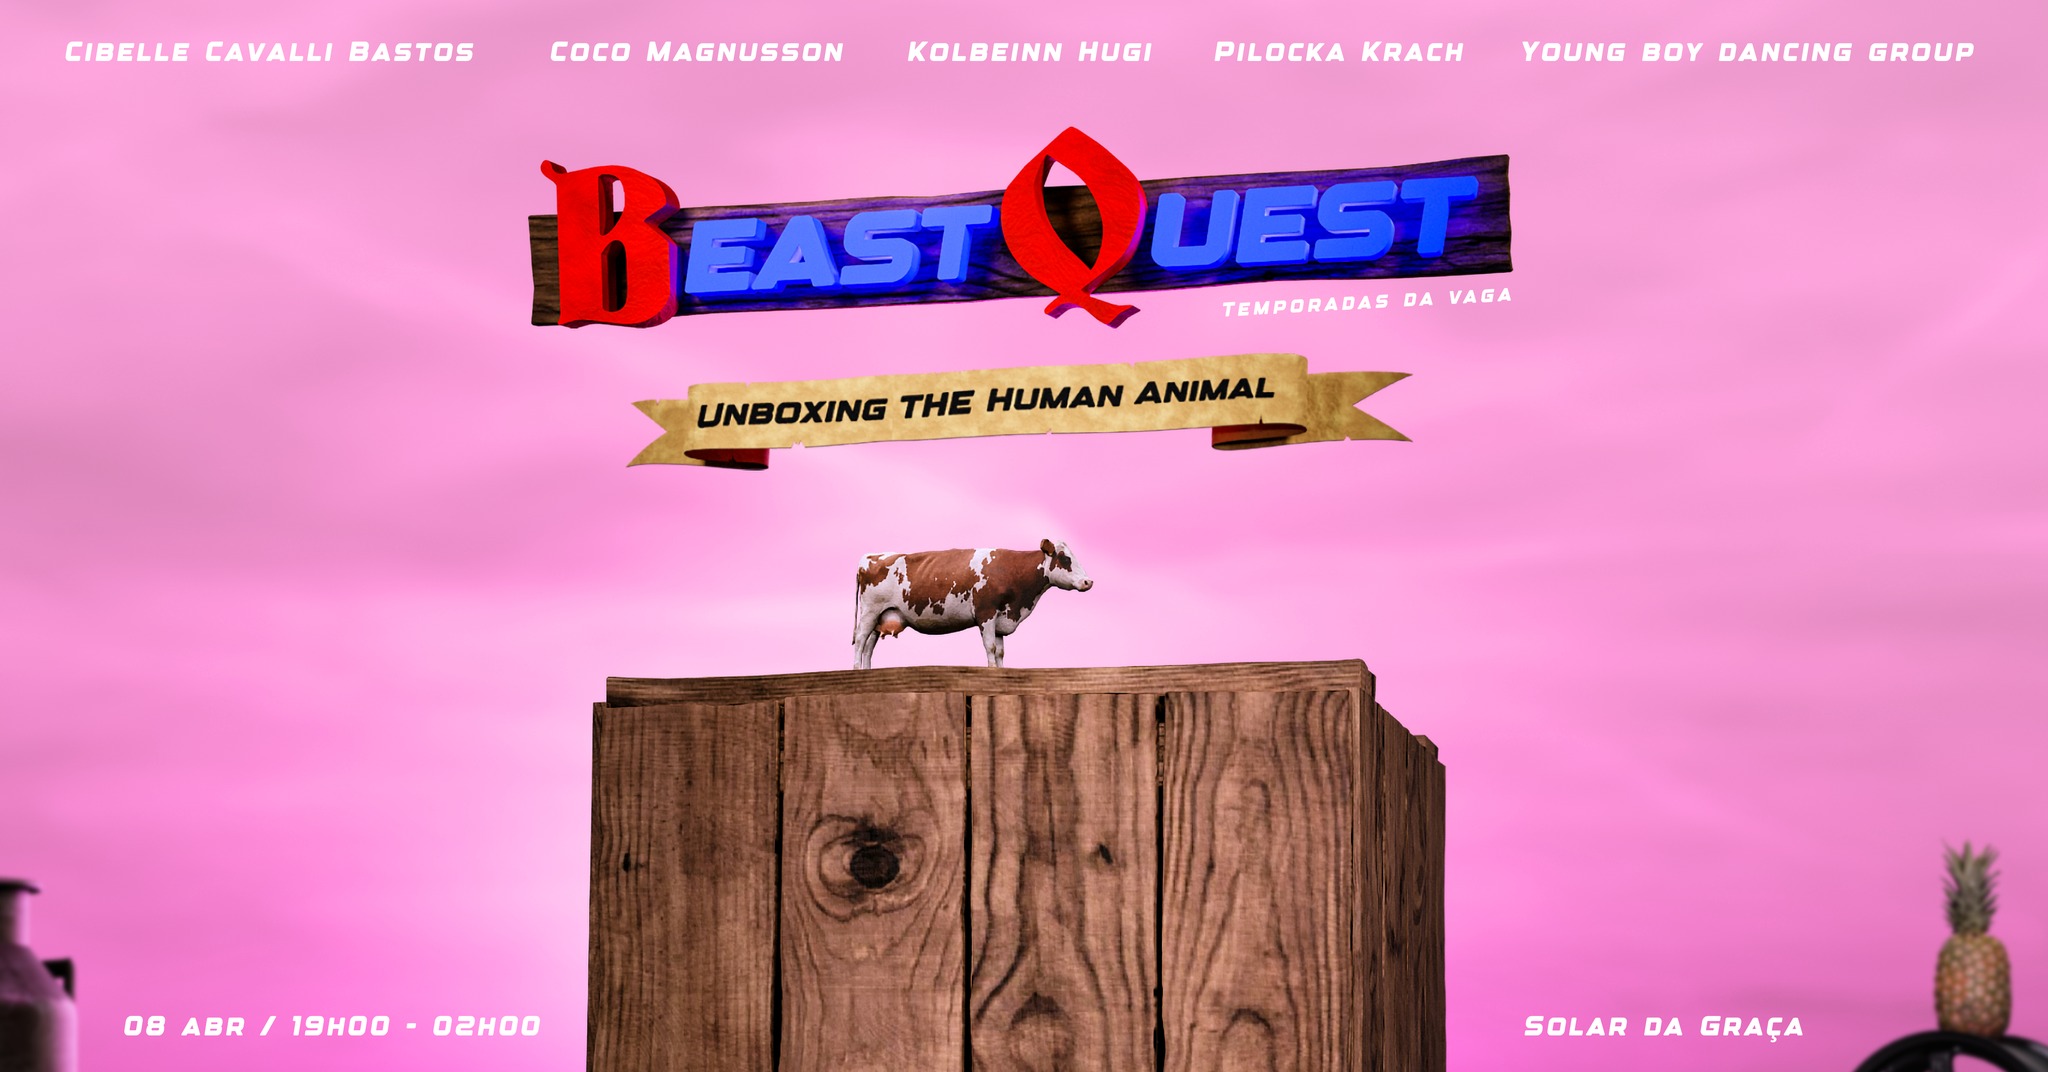 BEASTQUEST: Unboxing the Human Animal